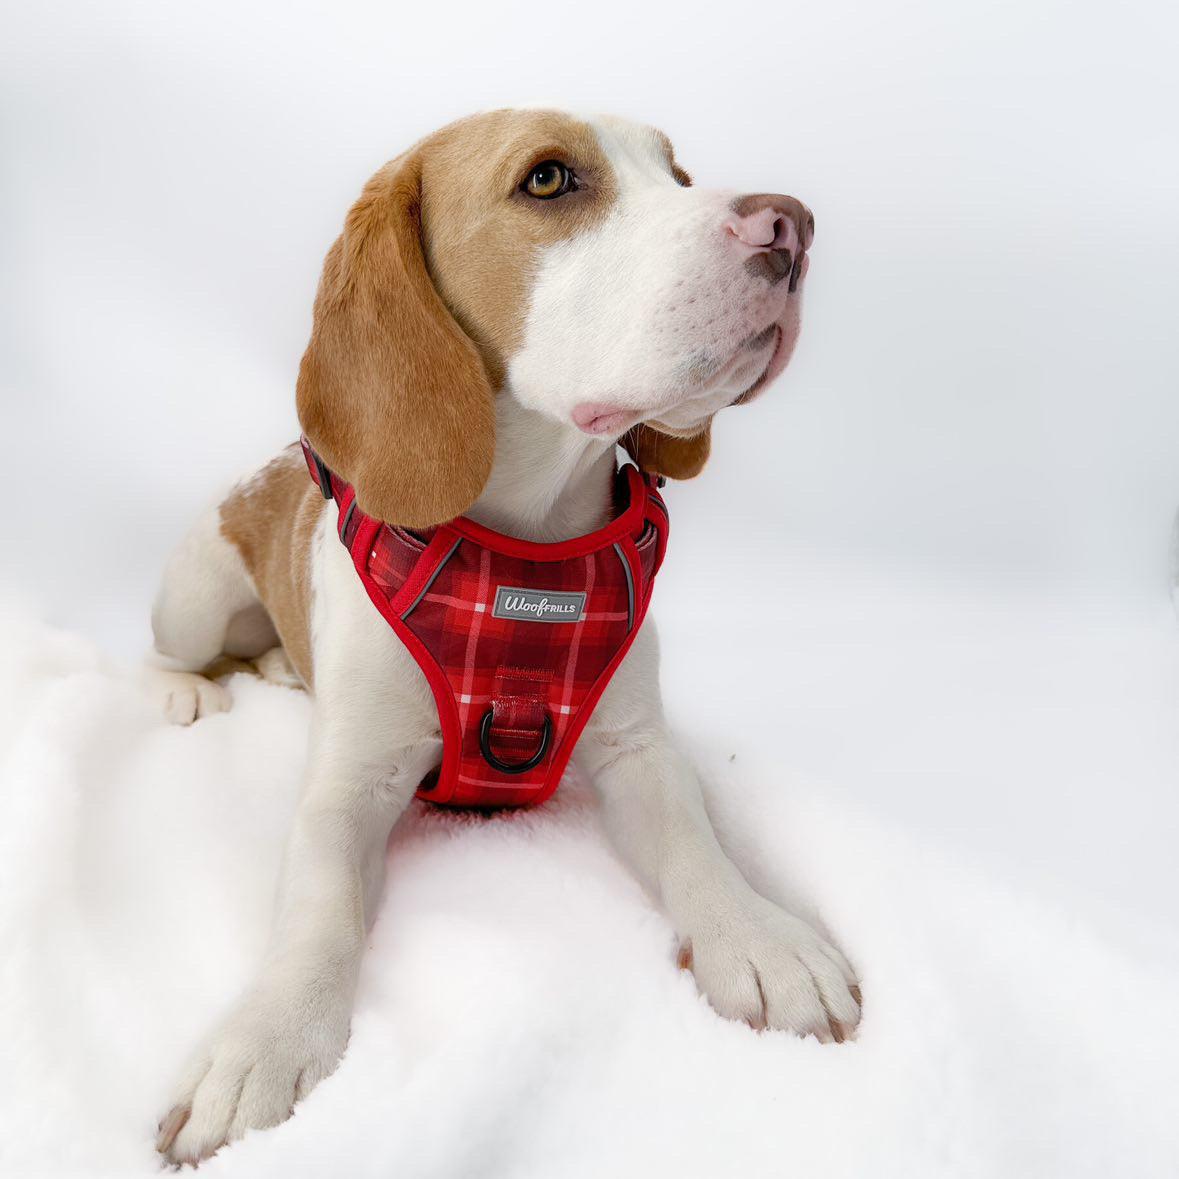 Beagle wearing a red step in harness